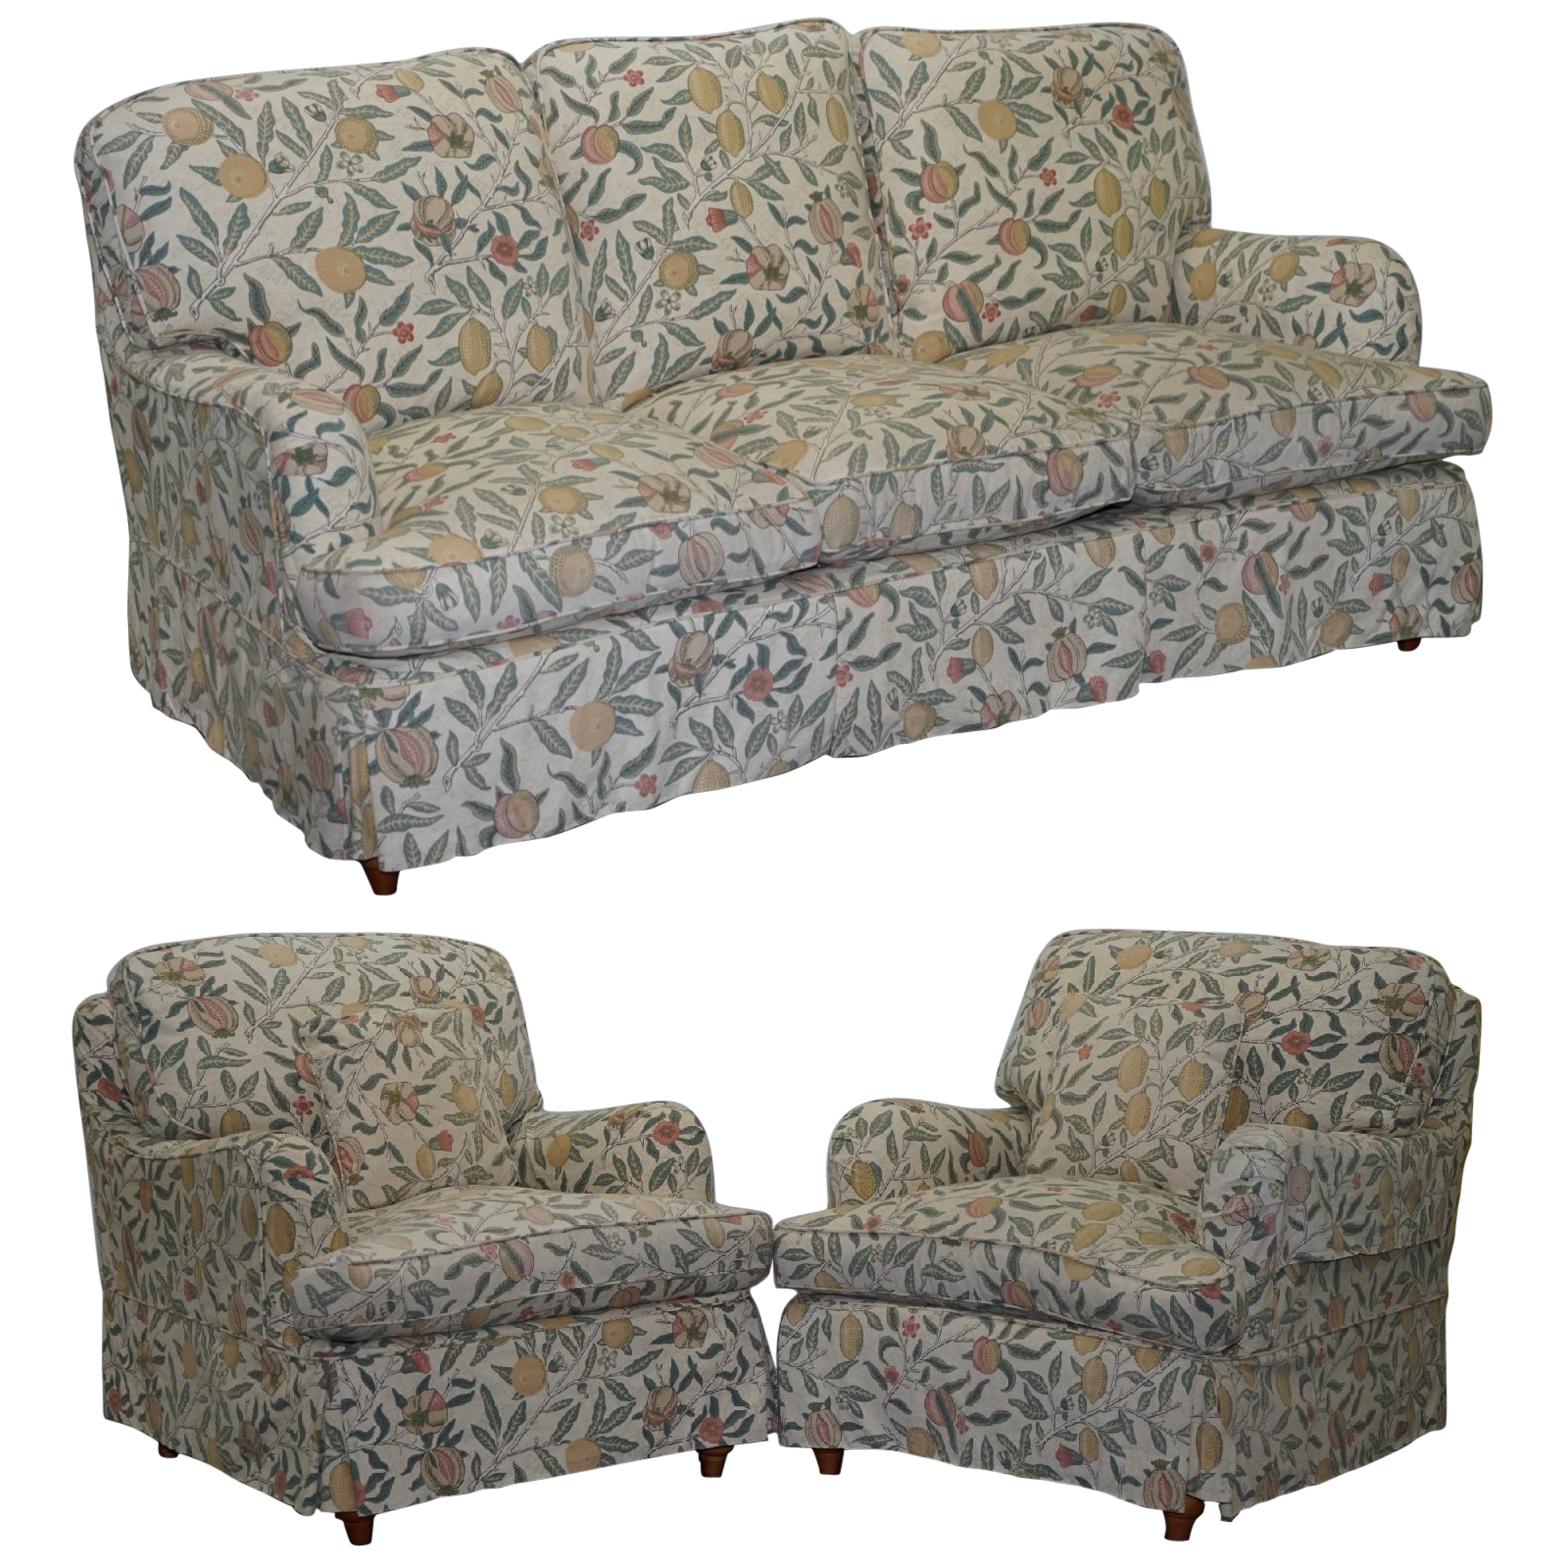 Multiyork Howard Sofa and Pair of Armchairs Suite Floral Upholstery